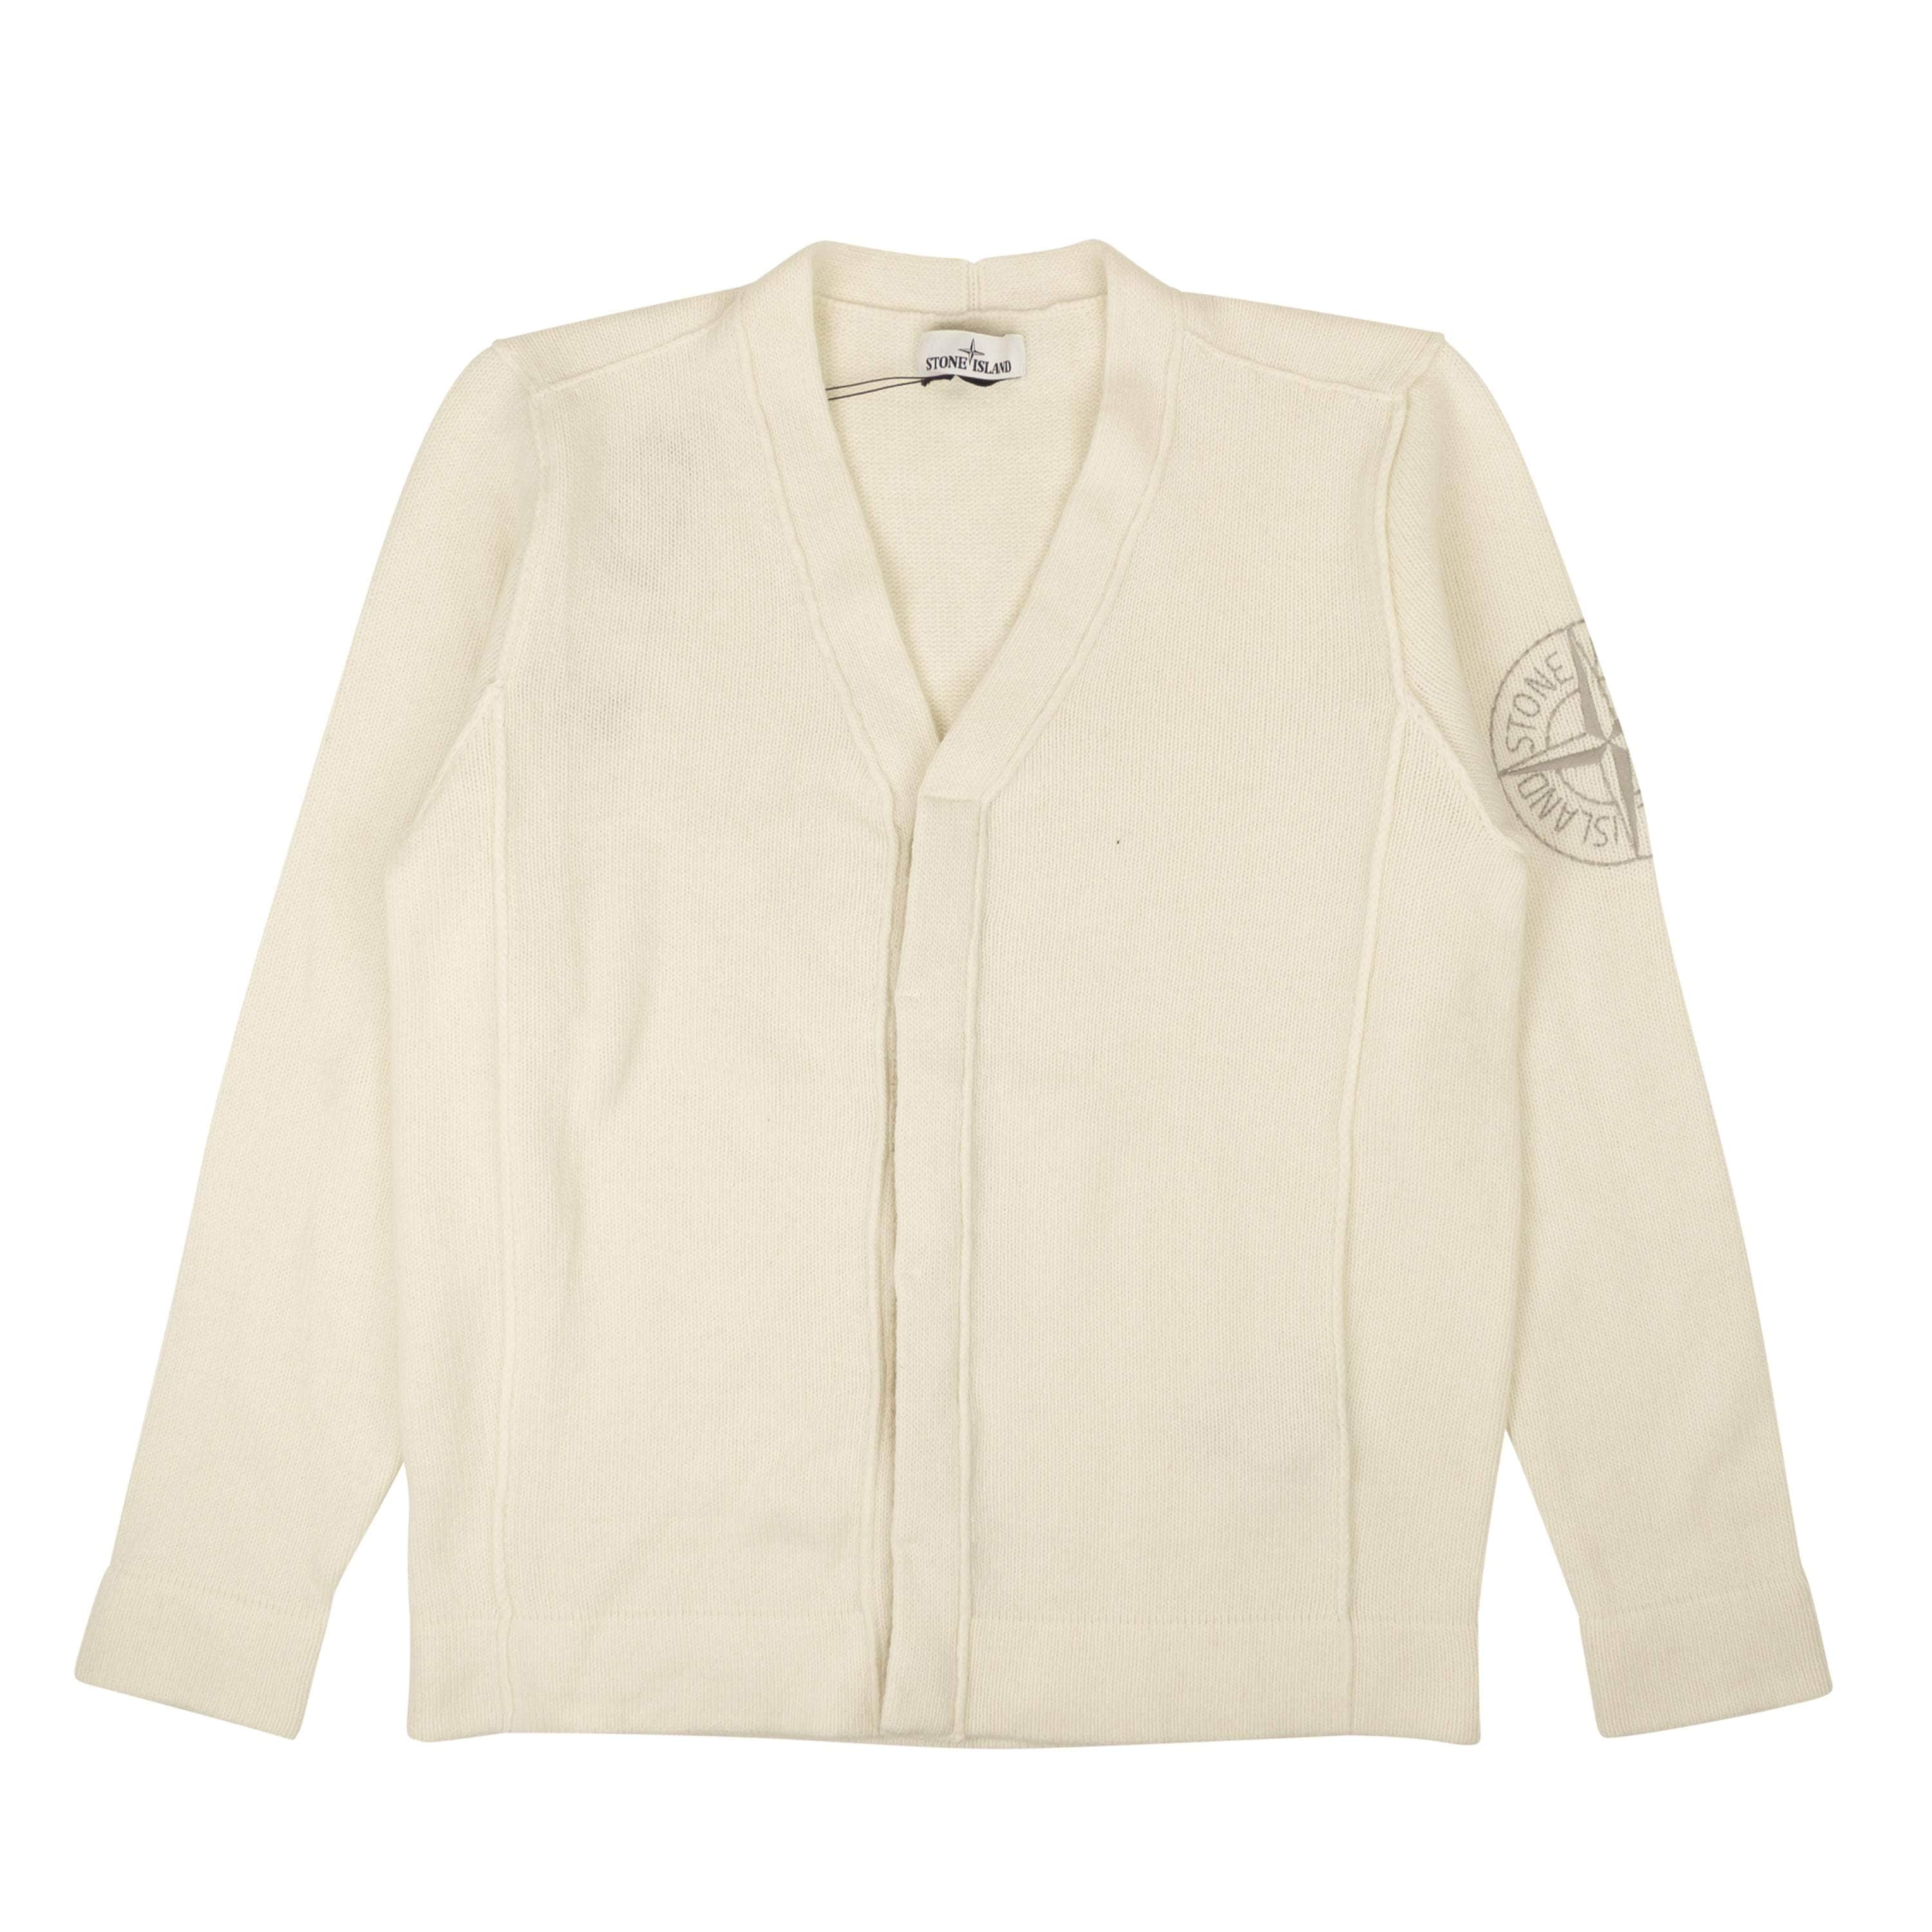 Stone Island 250-500, channelenable-all, chicmi, couponcollection, gender-mens, main-clothing, mens-shoes, size-xl, stone-island XL / MO7115549C7.V0099 Off White Wool Blend Button V-Neck Cardigan 95-STI-1010/XL 95-STI-1010/XL